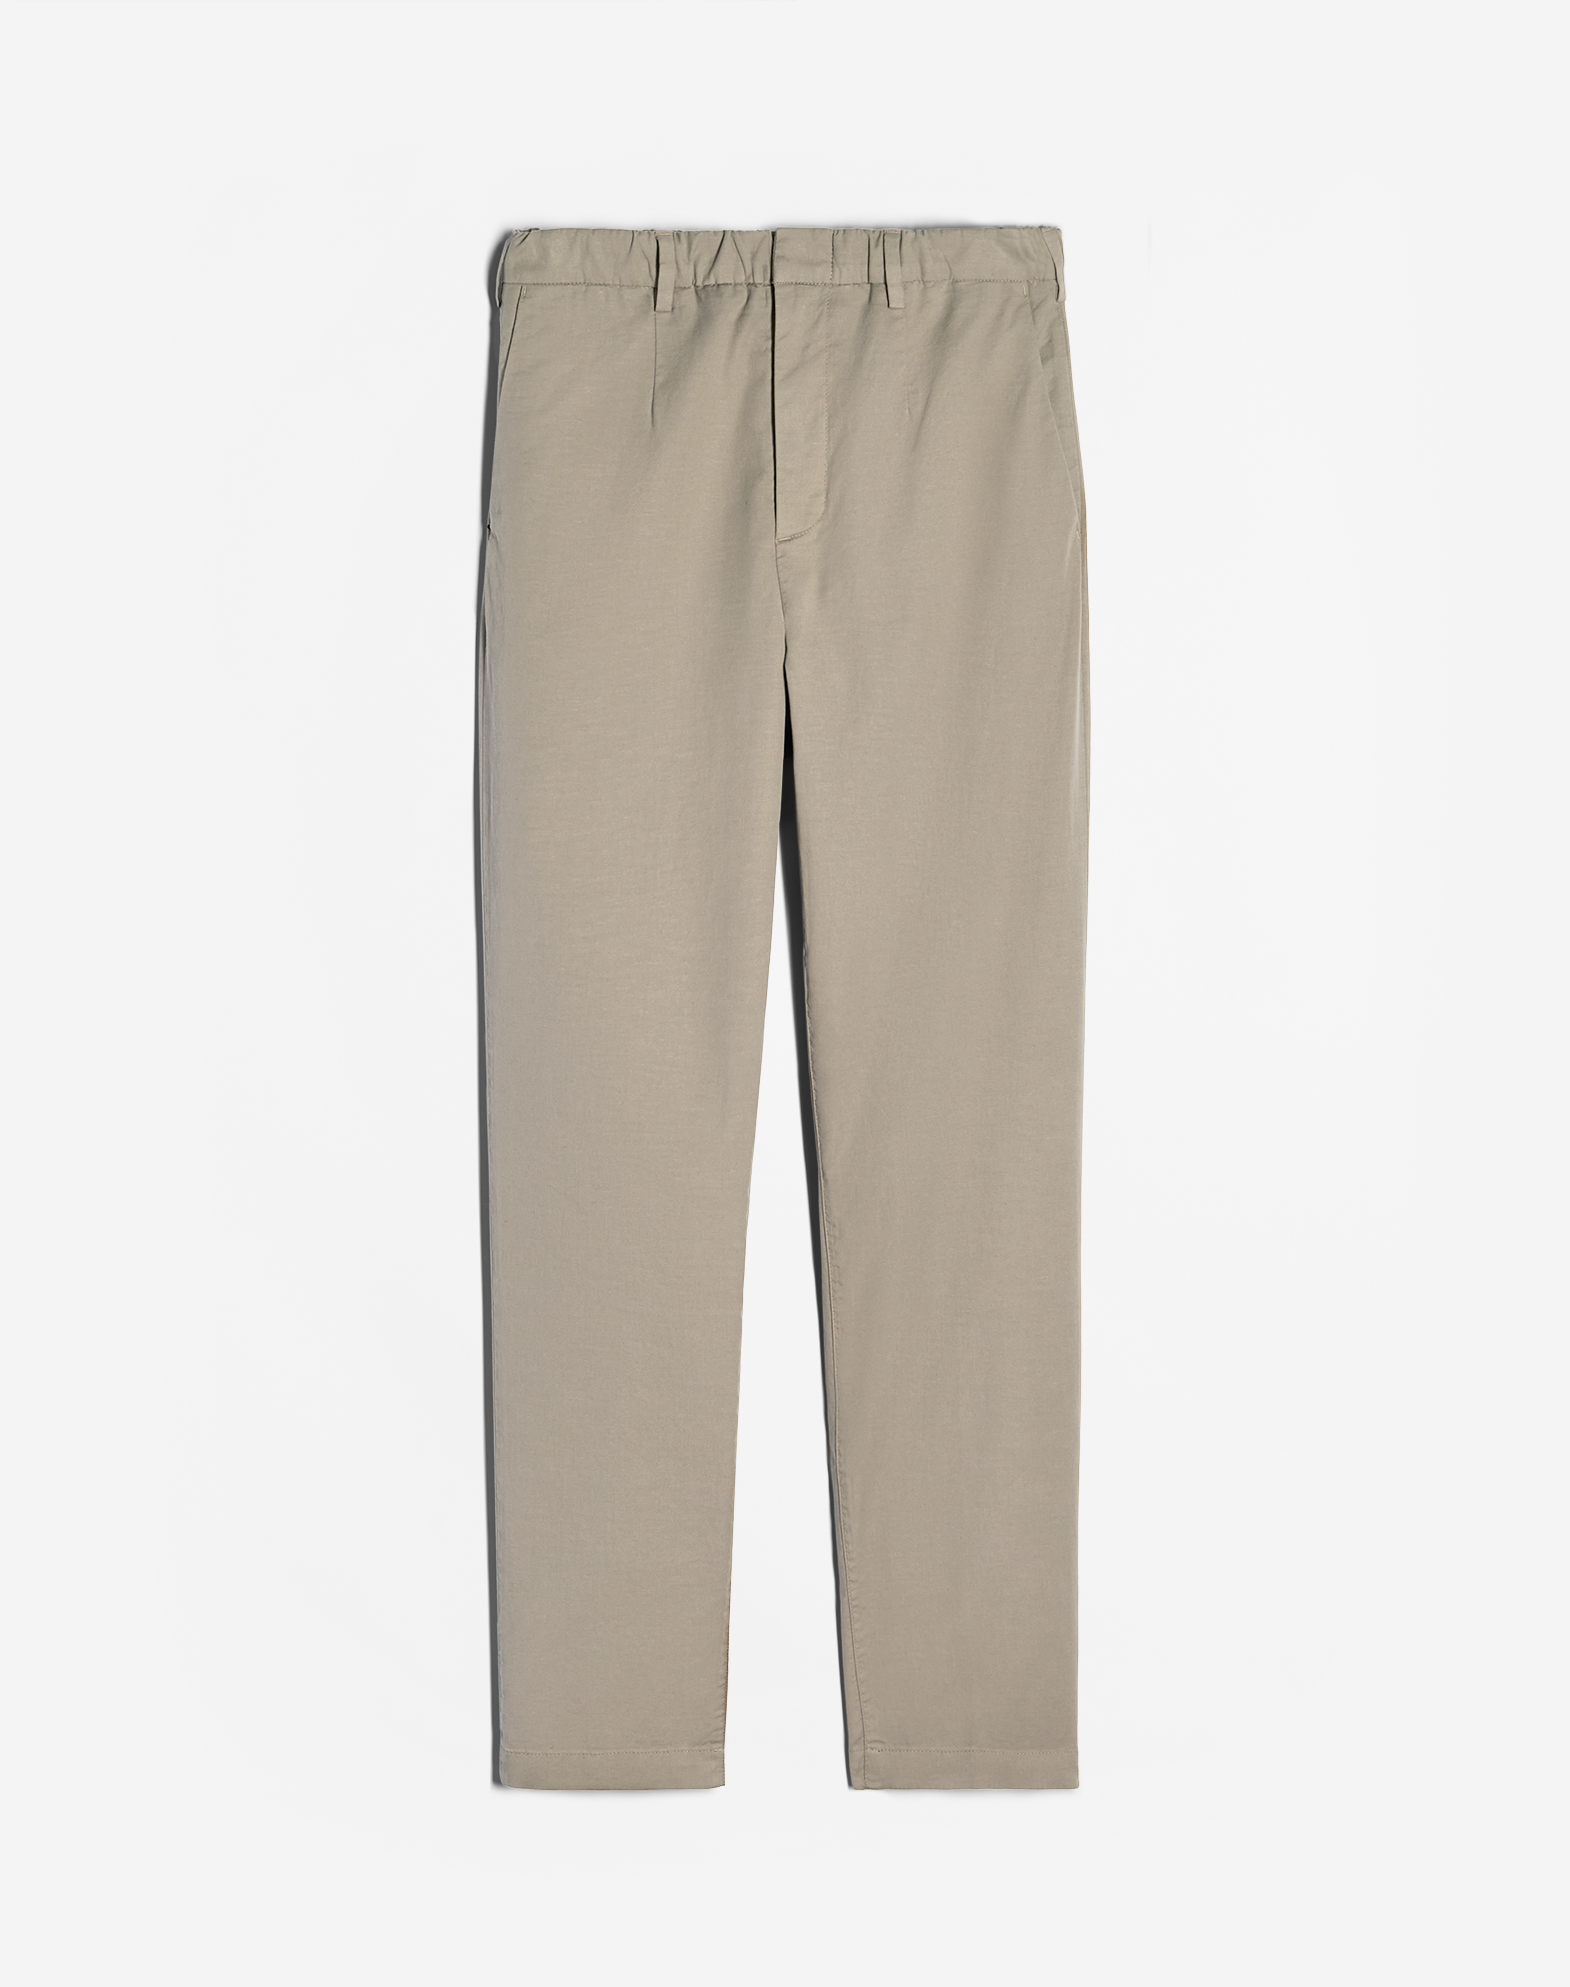 DUNHILL PERFORMANCE SPORTS PANT